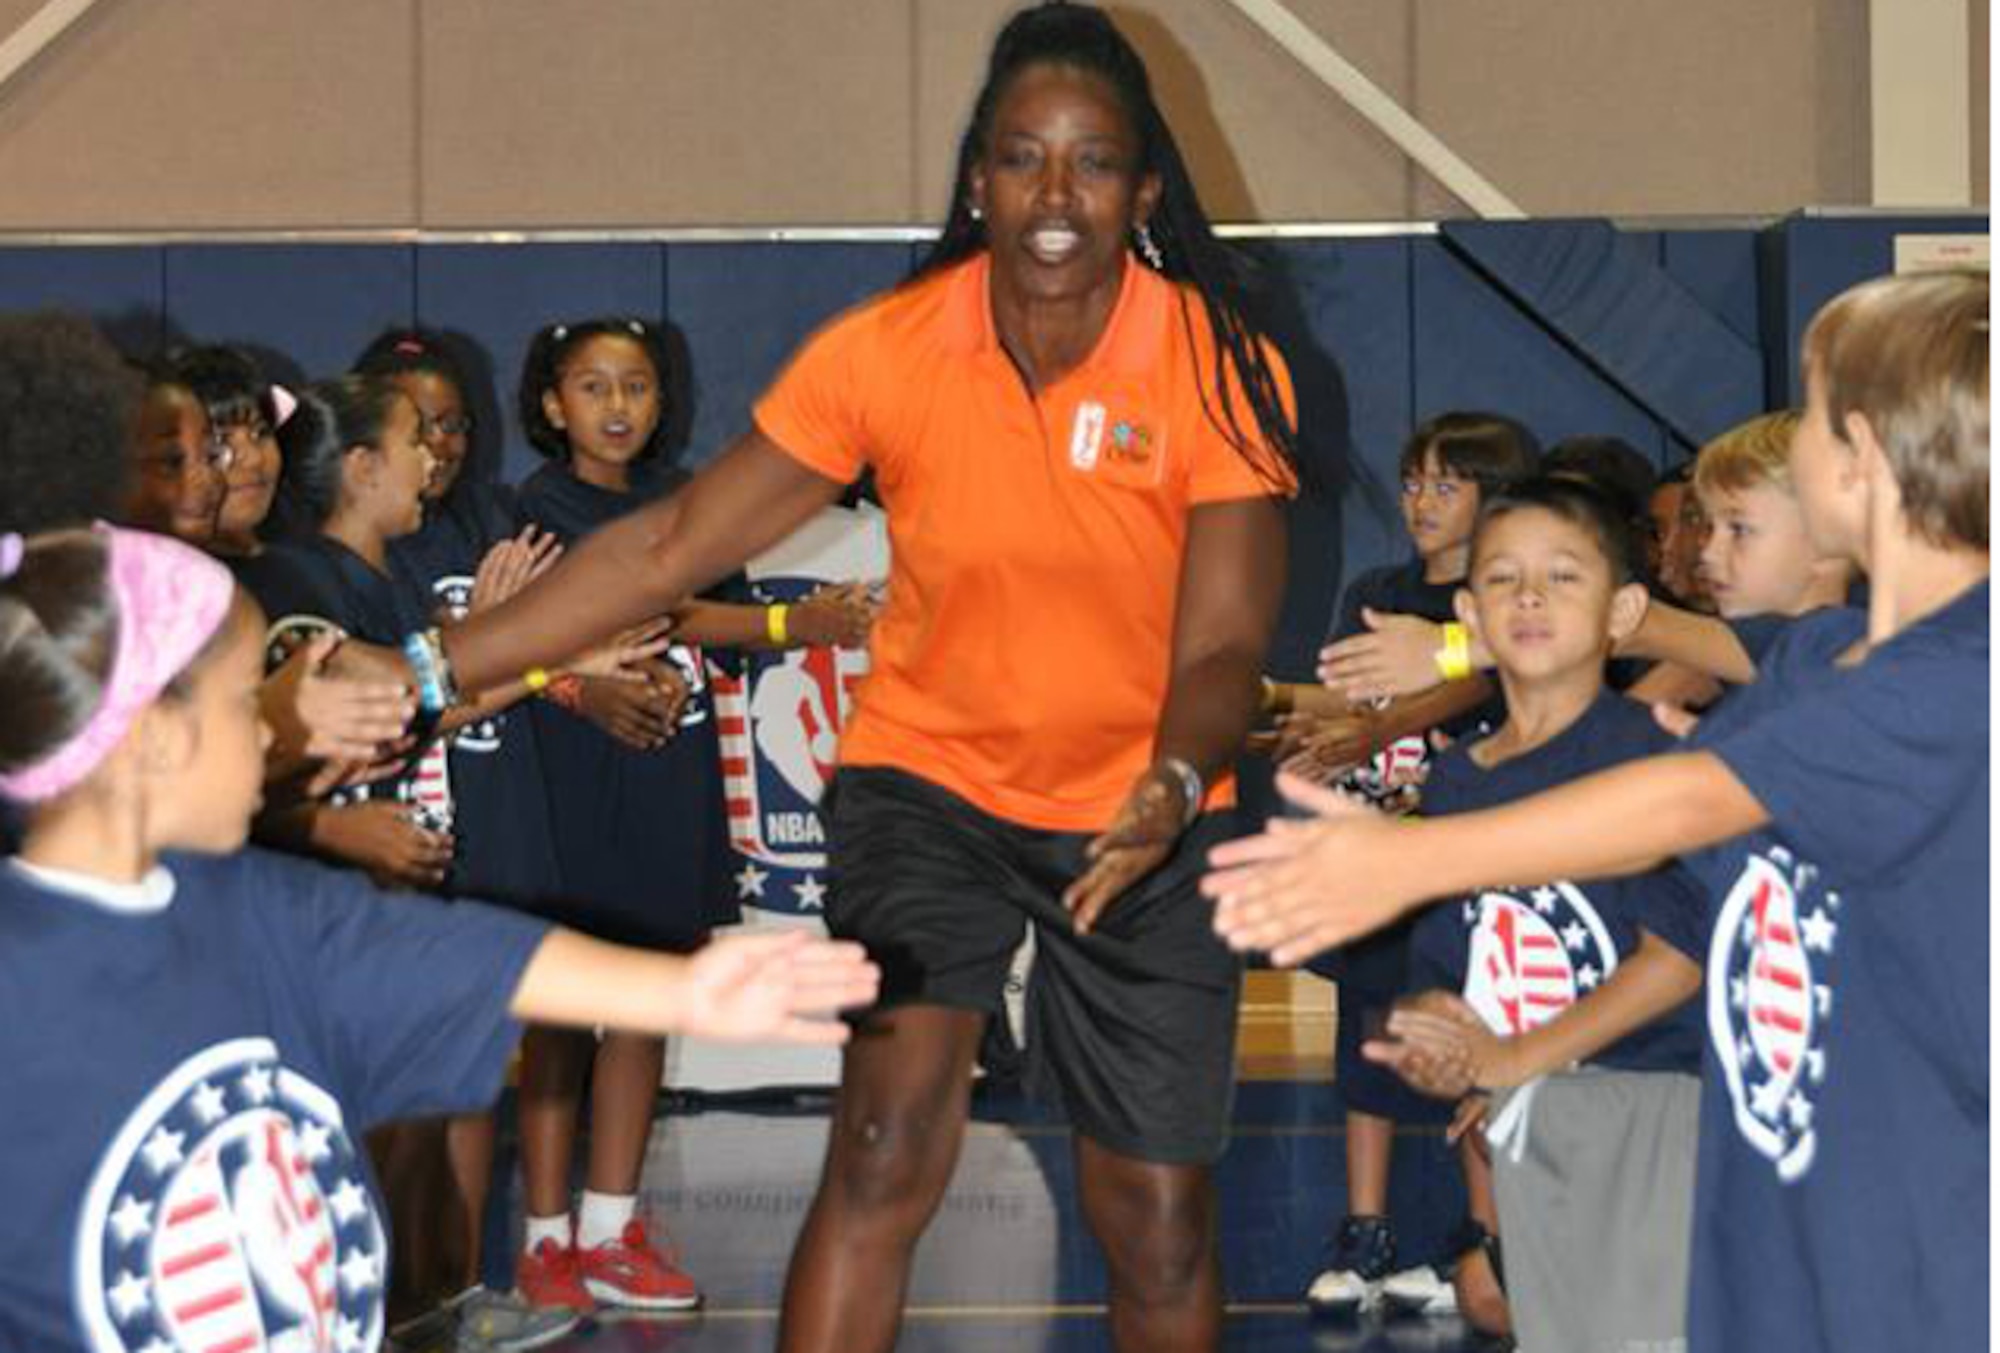 Ruthie Bolton, former Women’s National Basketball Association star and two-time Olympic gold medalist, is greeted by military children at March Air Reserve Base, Calif., during the NBA Cares Hoops for Troops basketball clinic Sept. 8, 2013. The NBA Cares program sponsored the event in conjunction with the Healthy Base Initiative kickoff. (U.S. Air Force photo/Master Sgt. Linda Welz) 

